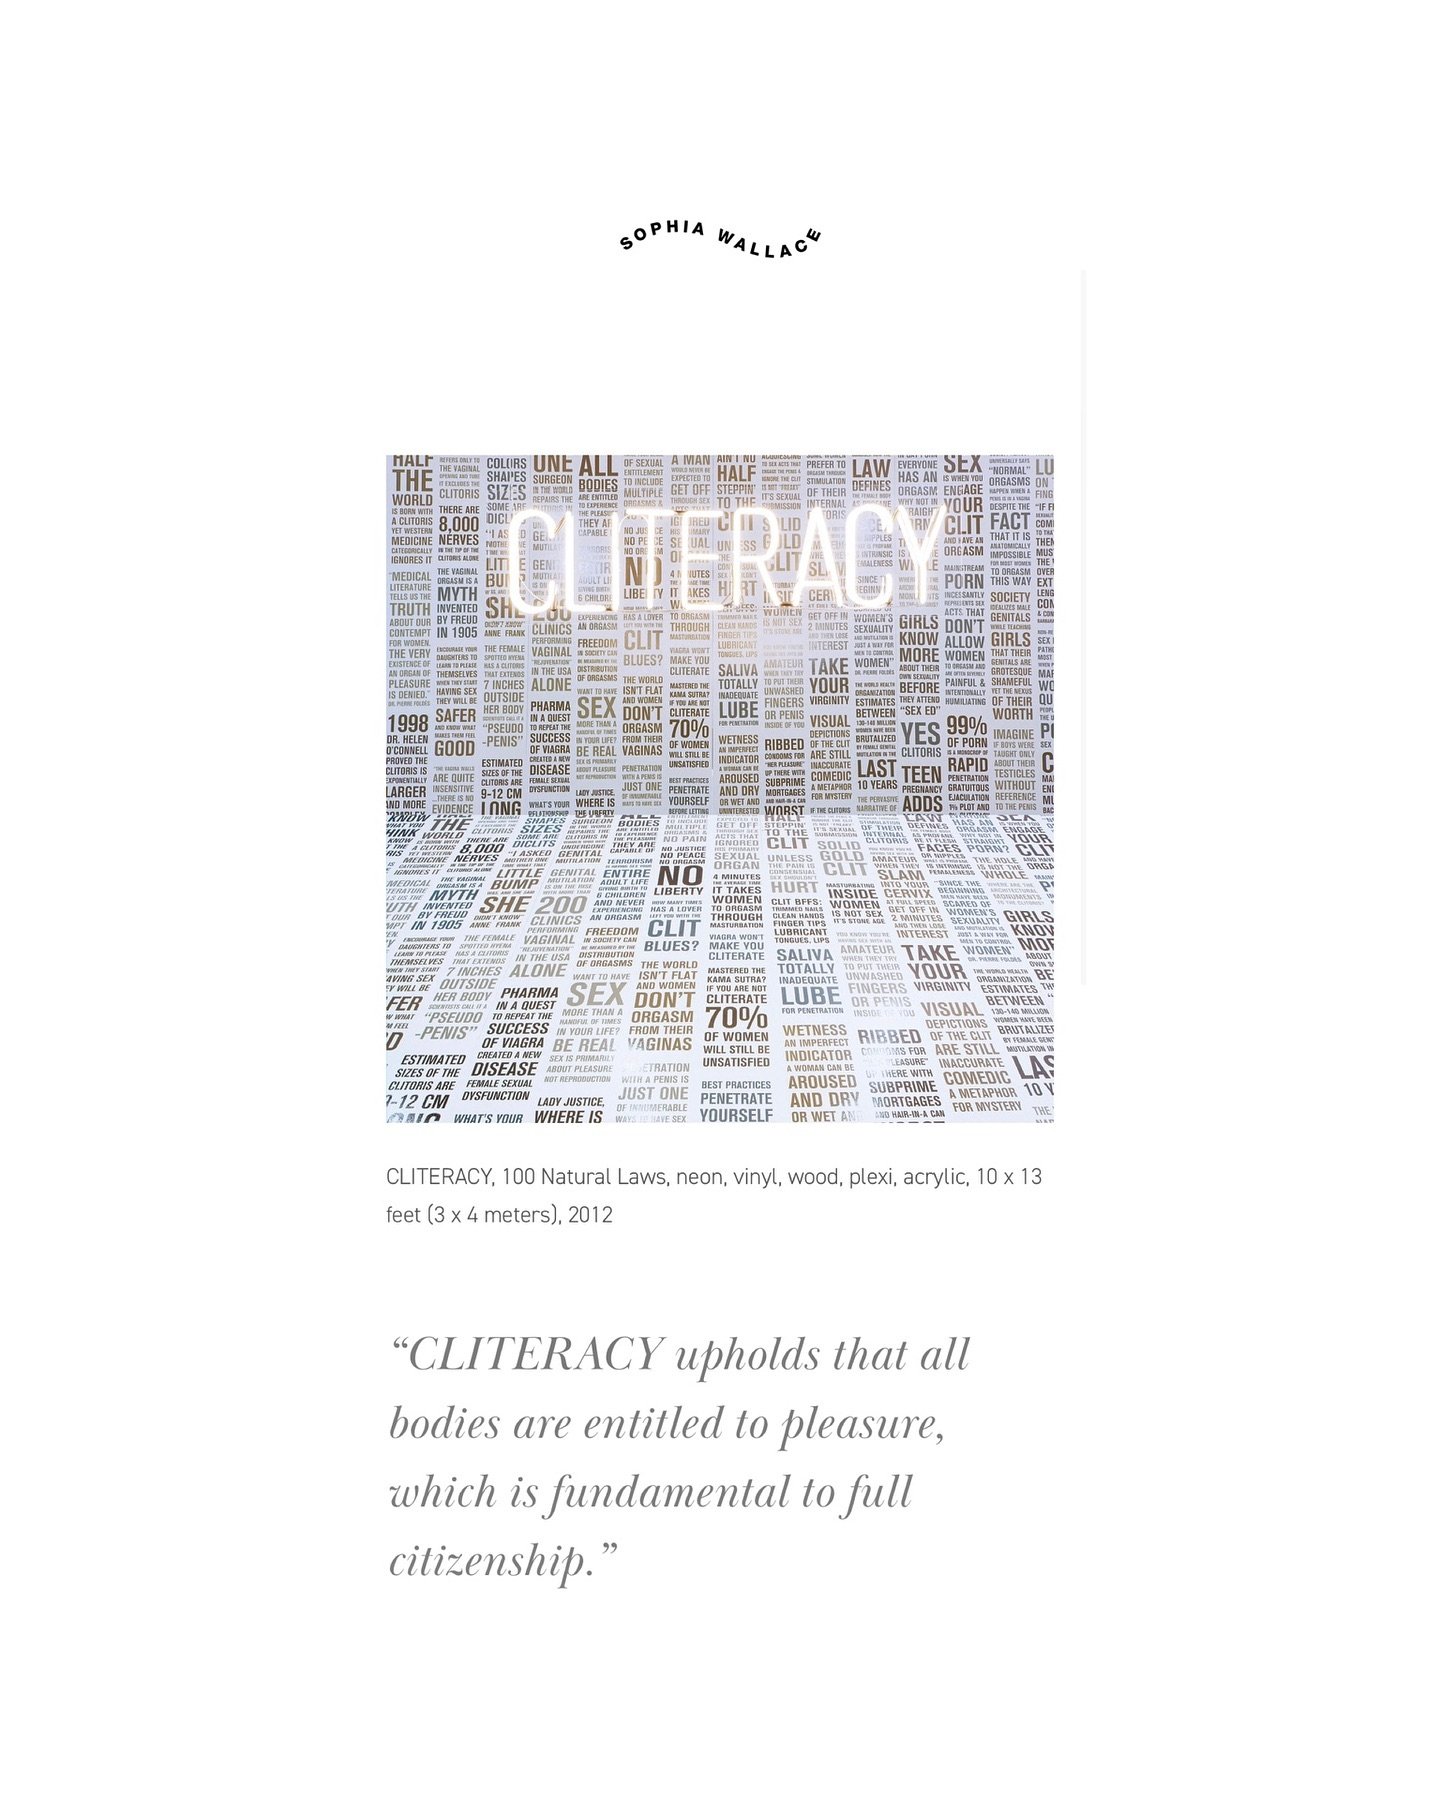 ✨ CLITERACY - forever and always a huge fan of @sophiawallaceartist &lsquo;s work 💗

&ldquo;CLITERACY upholds that all bodies are entitled to pleasure, which is fundamental to full citizenship.&rdquo; ~Sophia Wallace

This image has been my phone wa